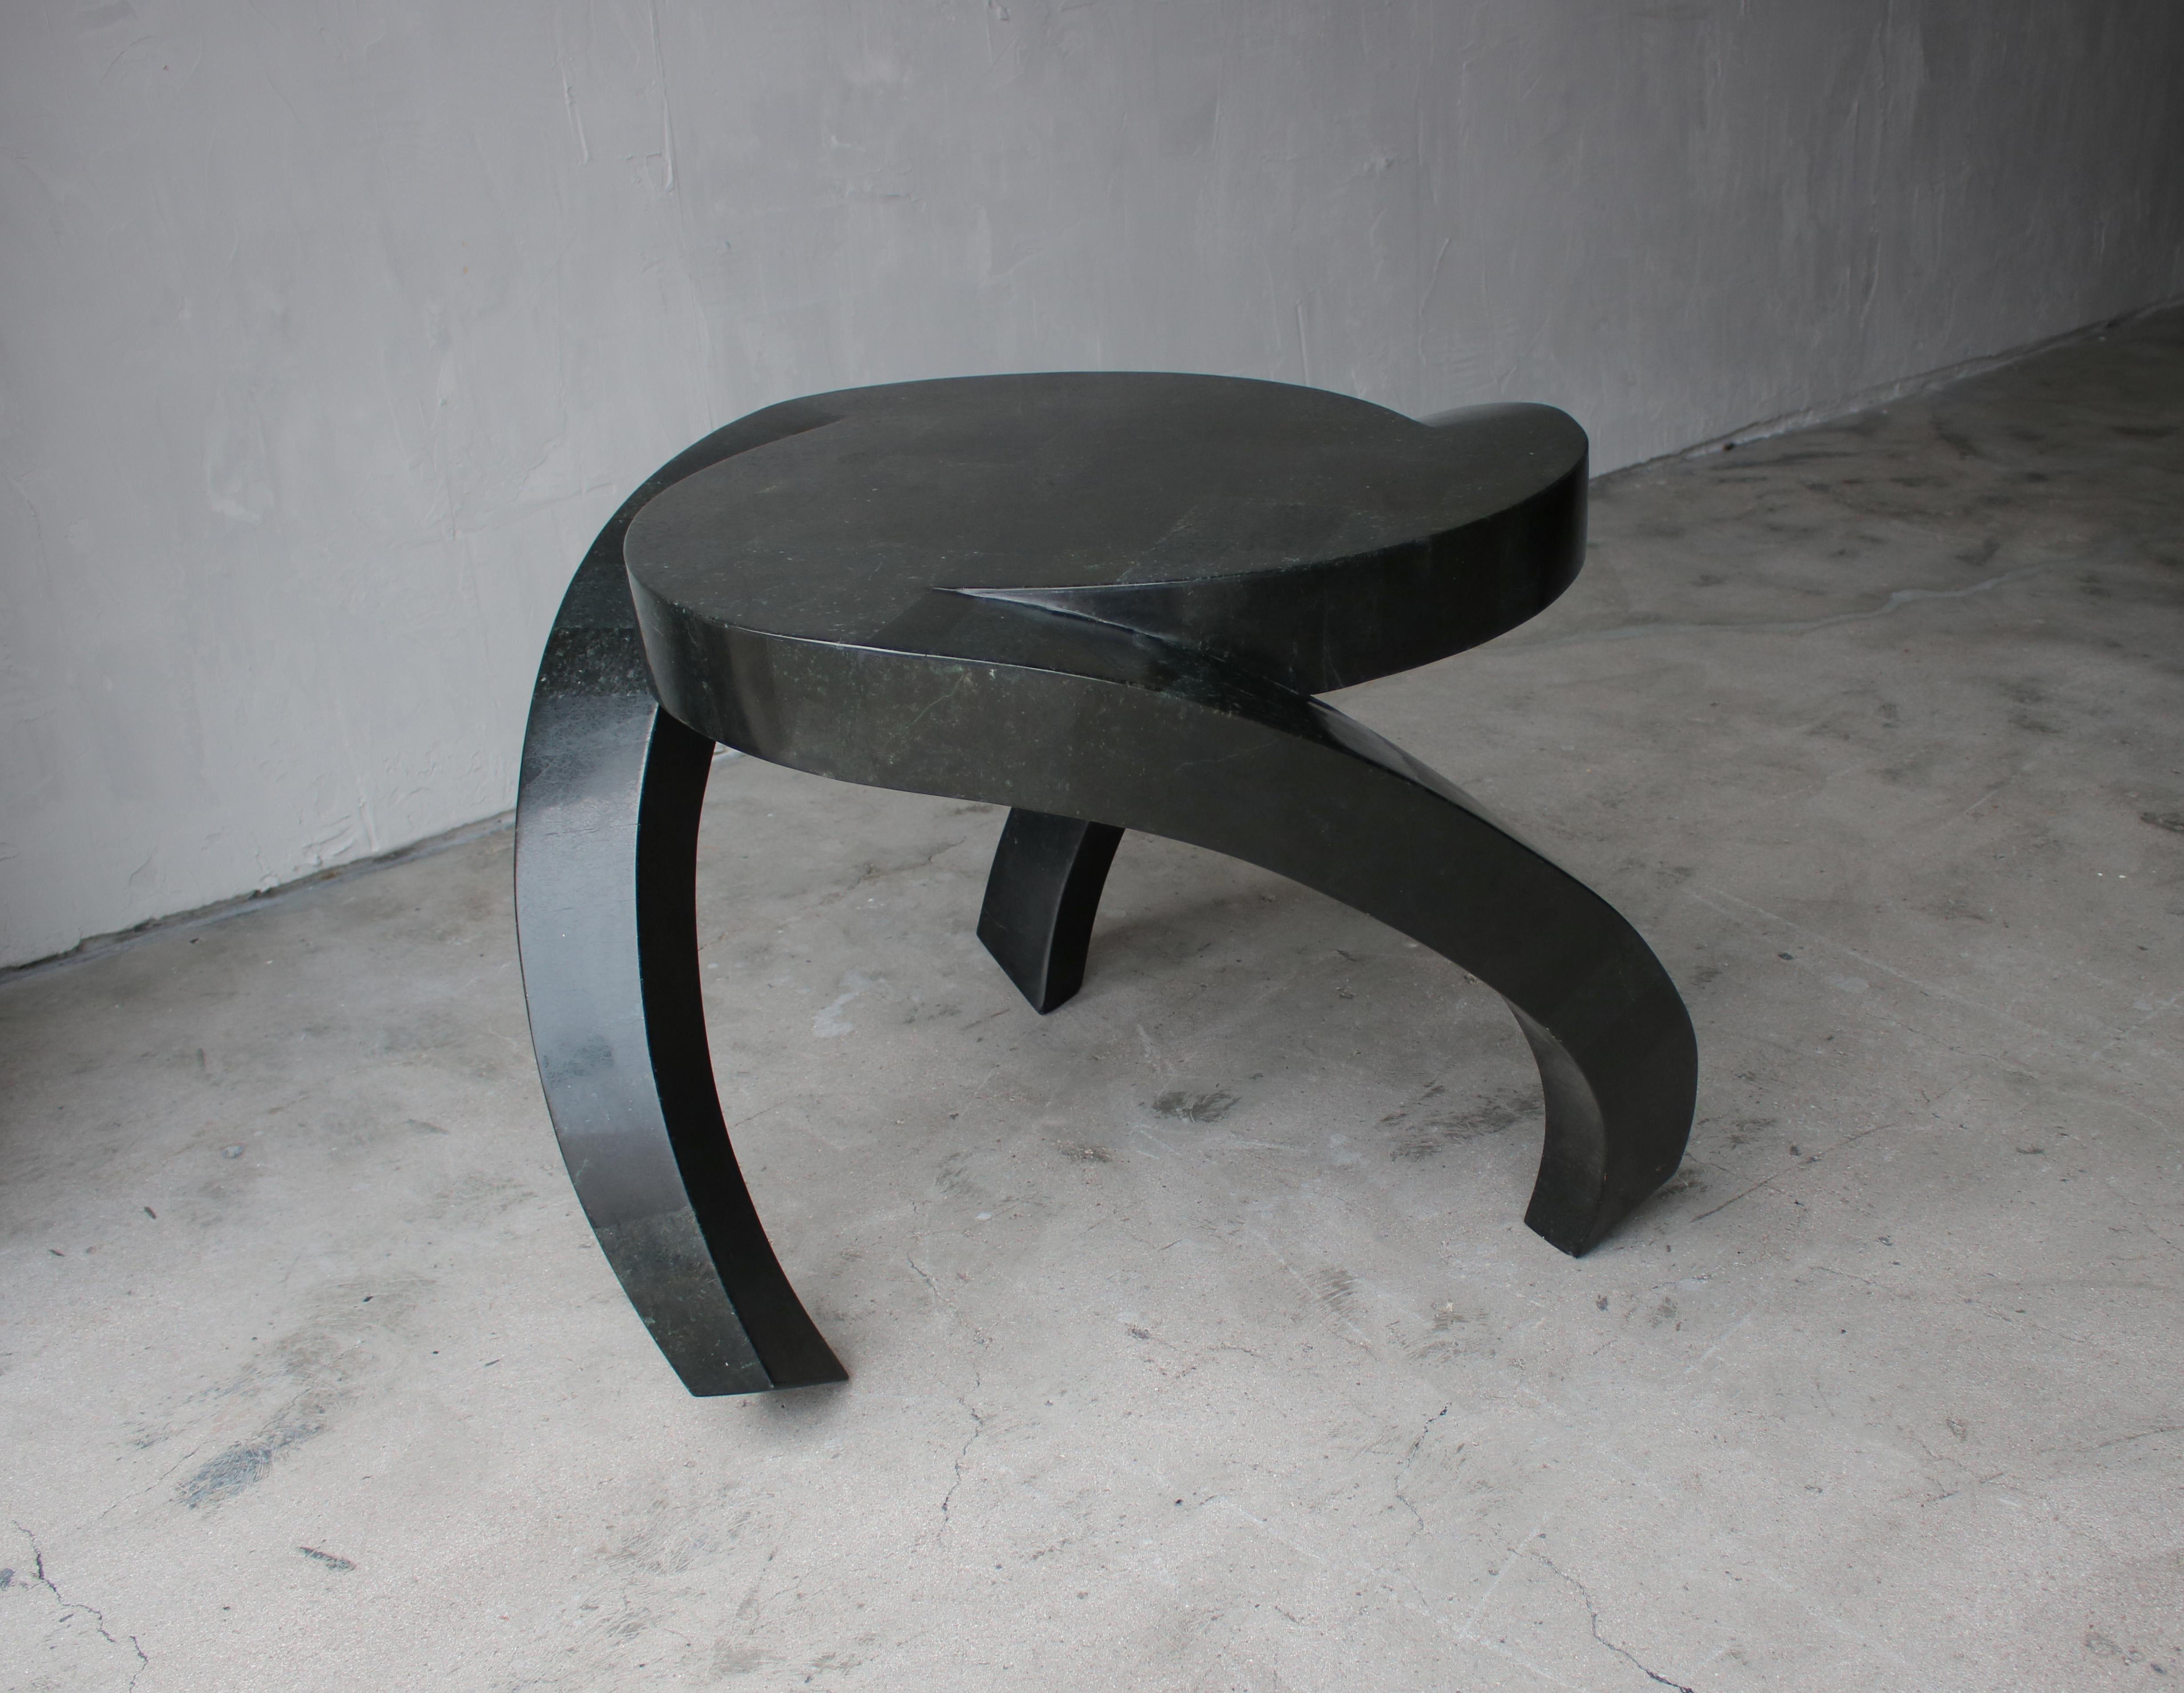 Look at this color. Gorgeous dark emerald green, tessellated stone side table by Maitland-Smith. Table has a very eye-catching, trefoil shape, with three waterfall legs. Very designer, you'll likely never see another like it.

Table is in